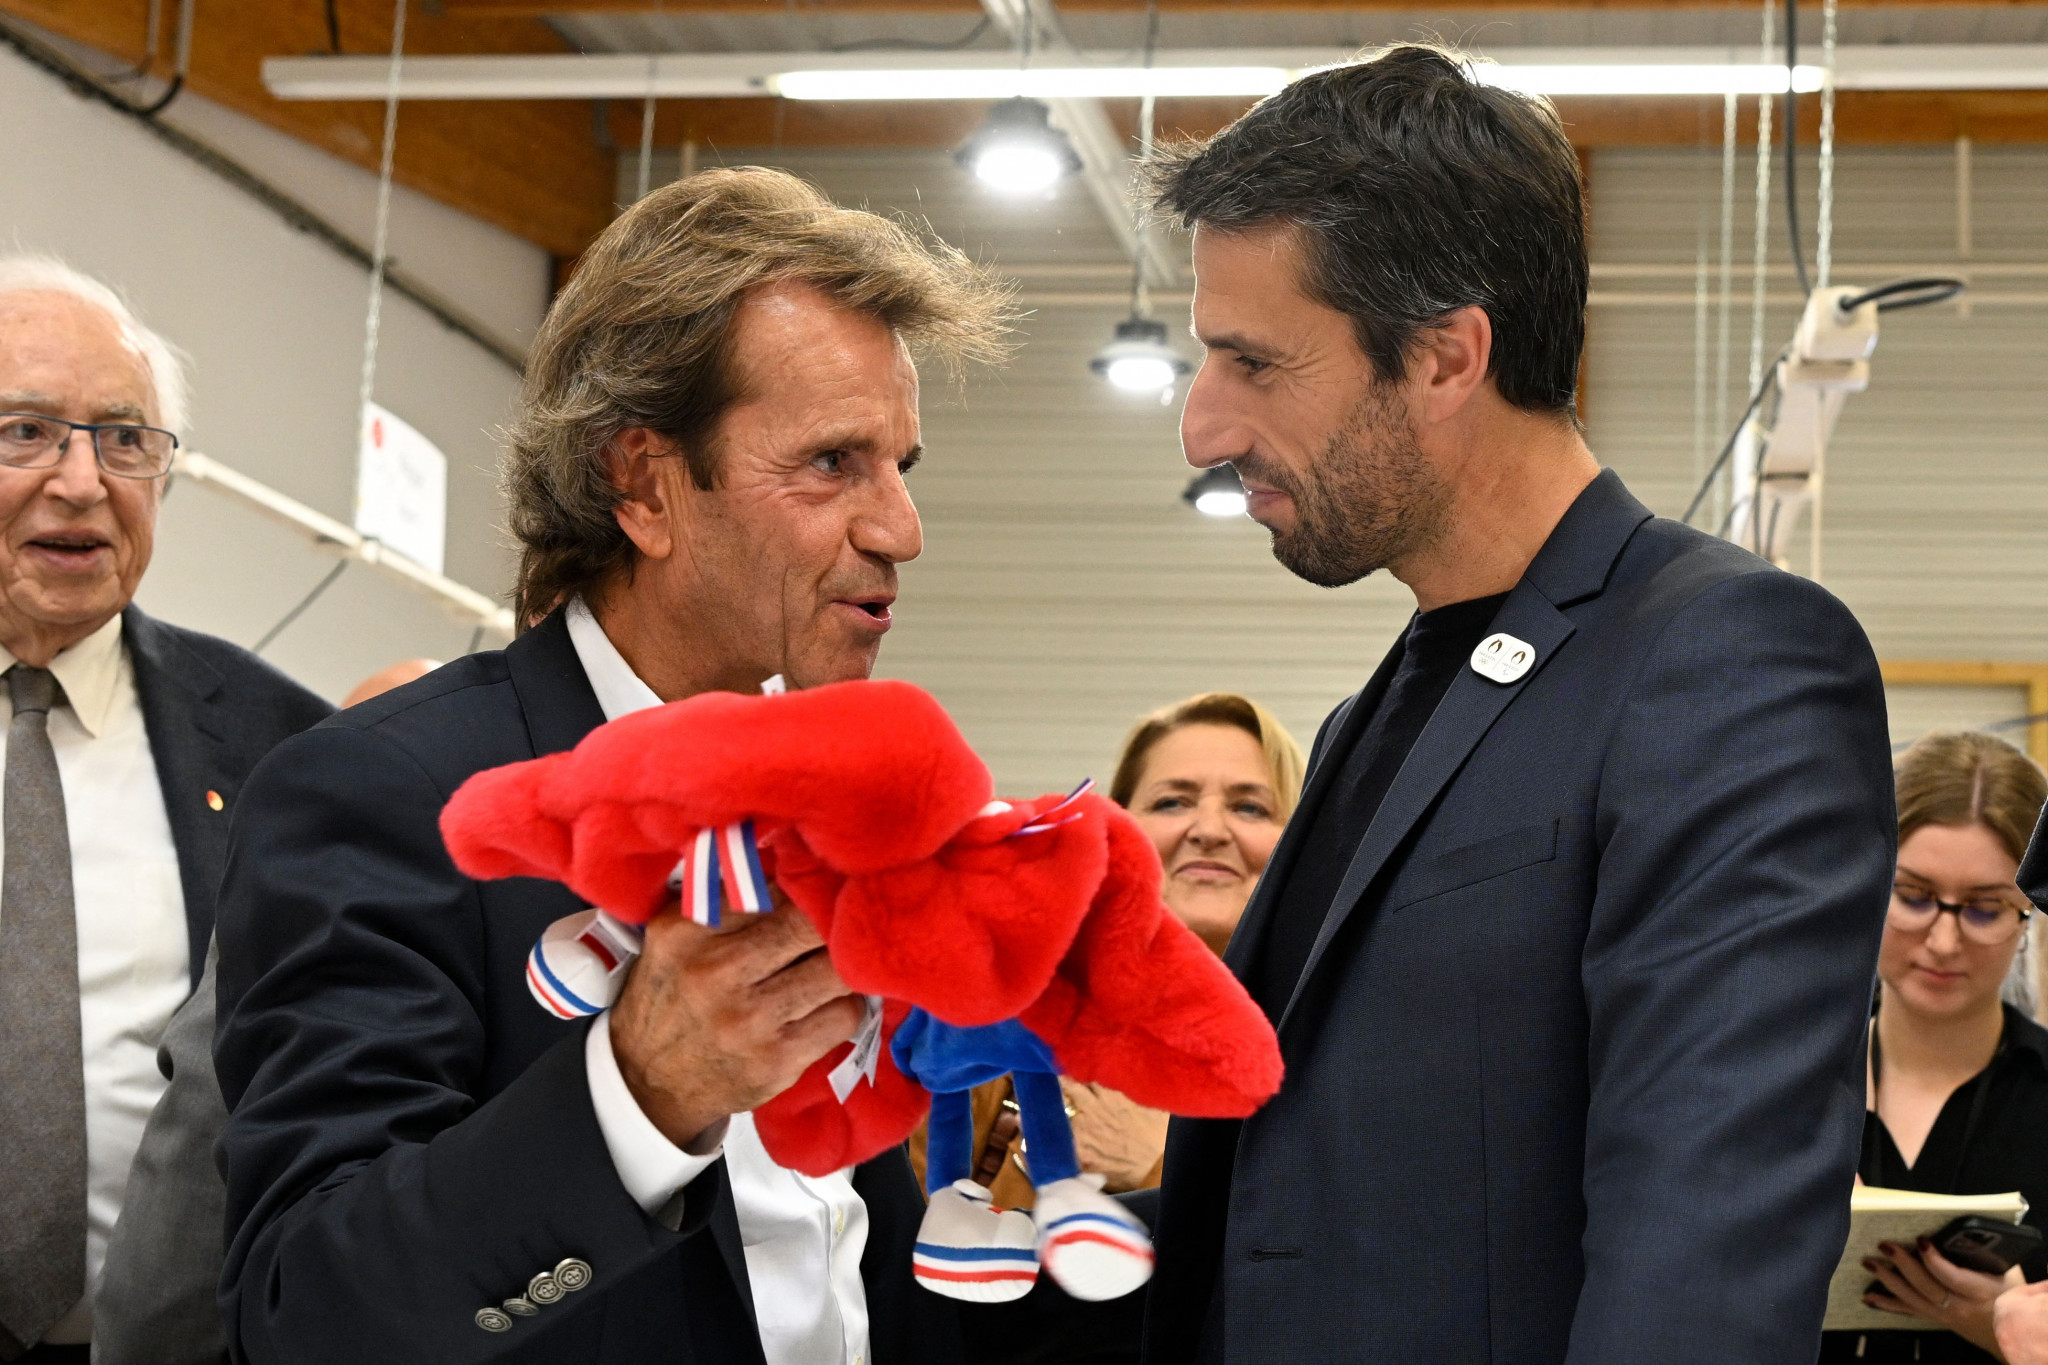 Doudou et Compagnie President Alain Joly, left, shows a mascot to Paris 2024 President Tony Estanguet as production began at a French factory this week ©Getty Images